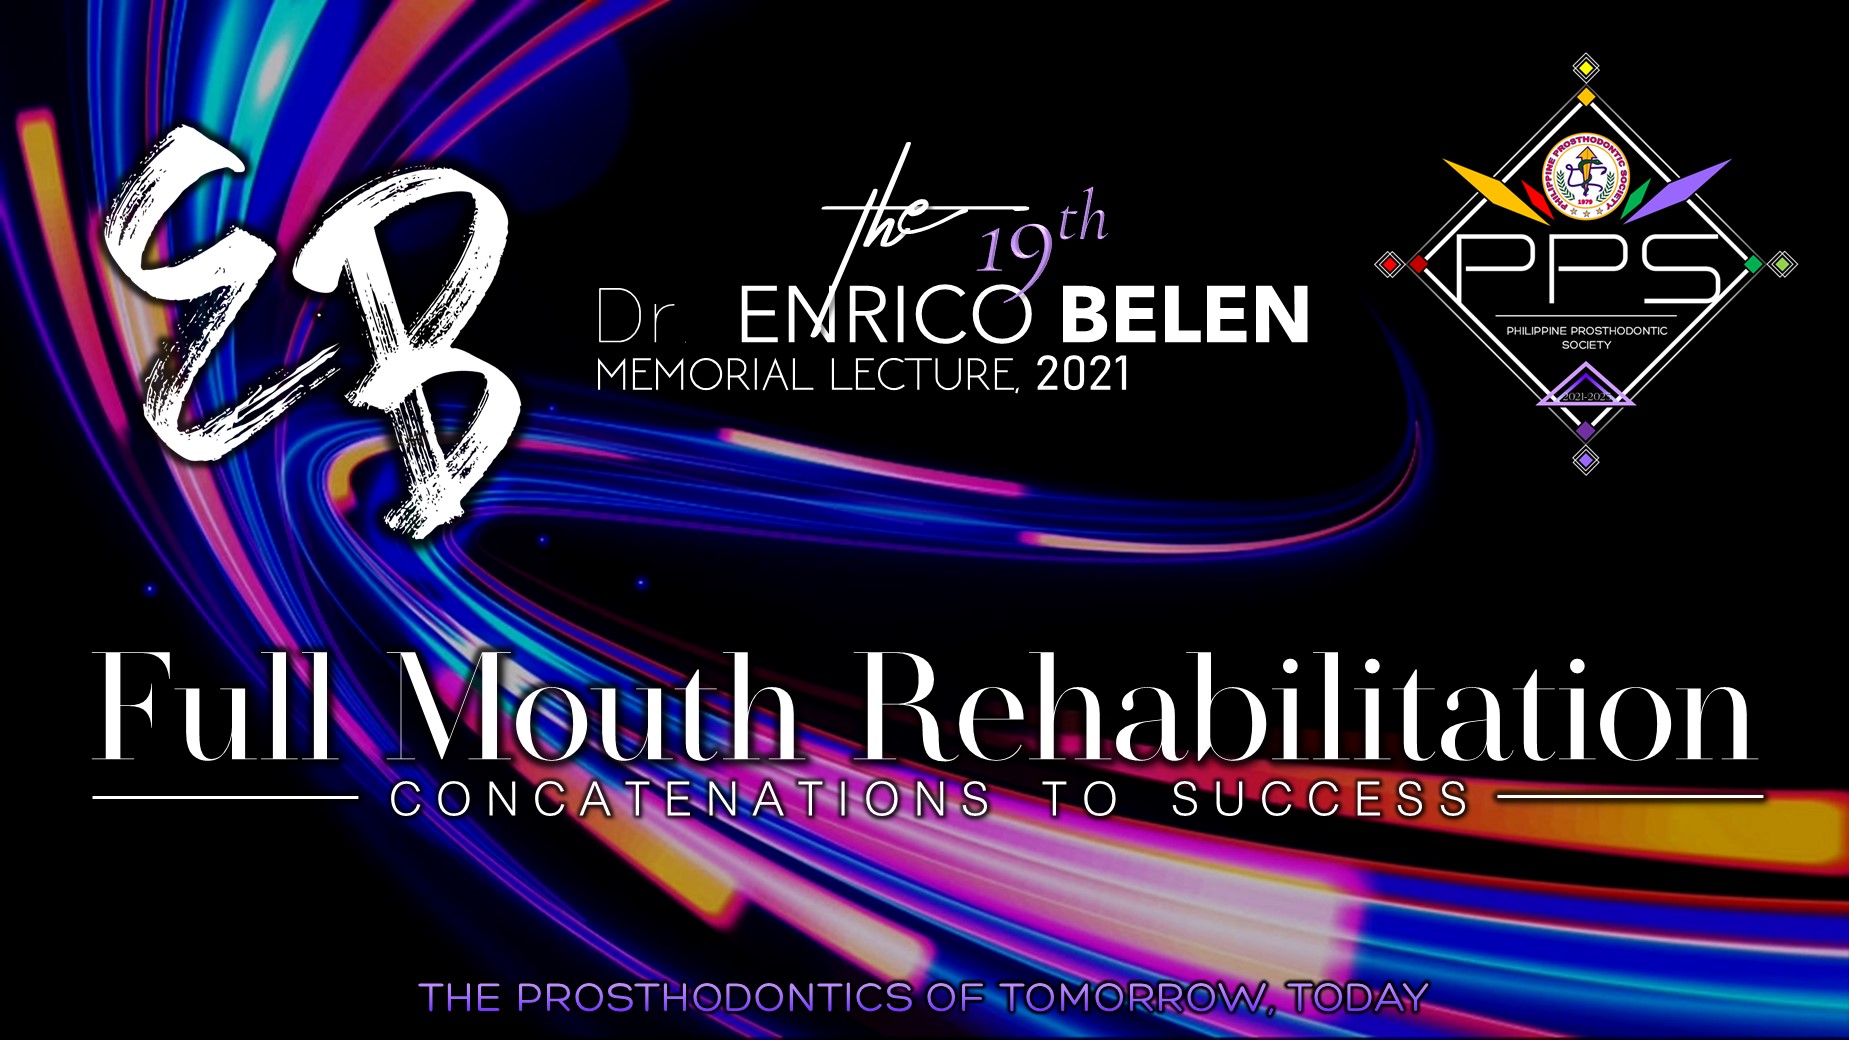 Full Mouth Rehabilitation - Concatenations to Sucess​